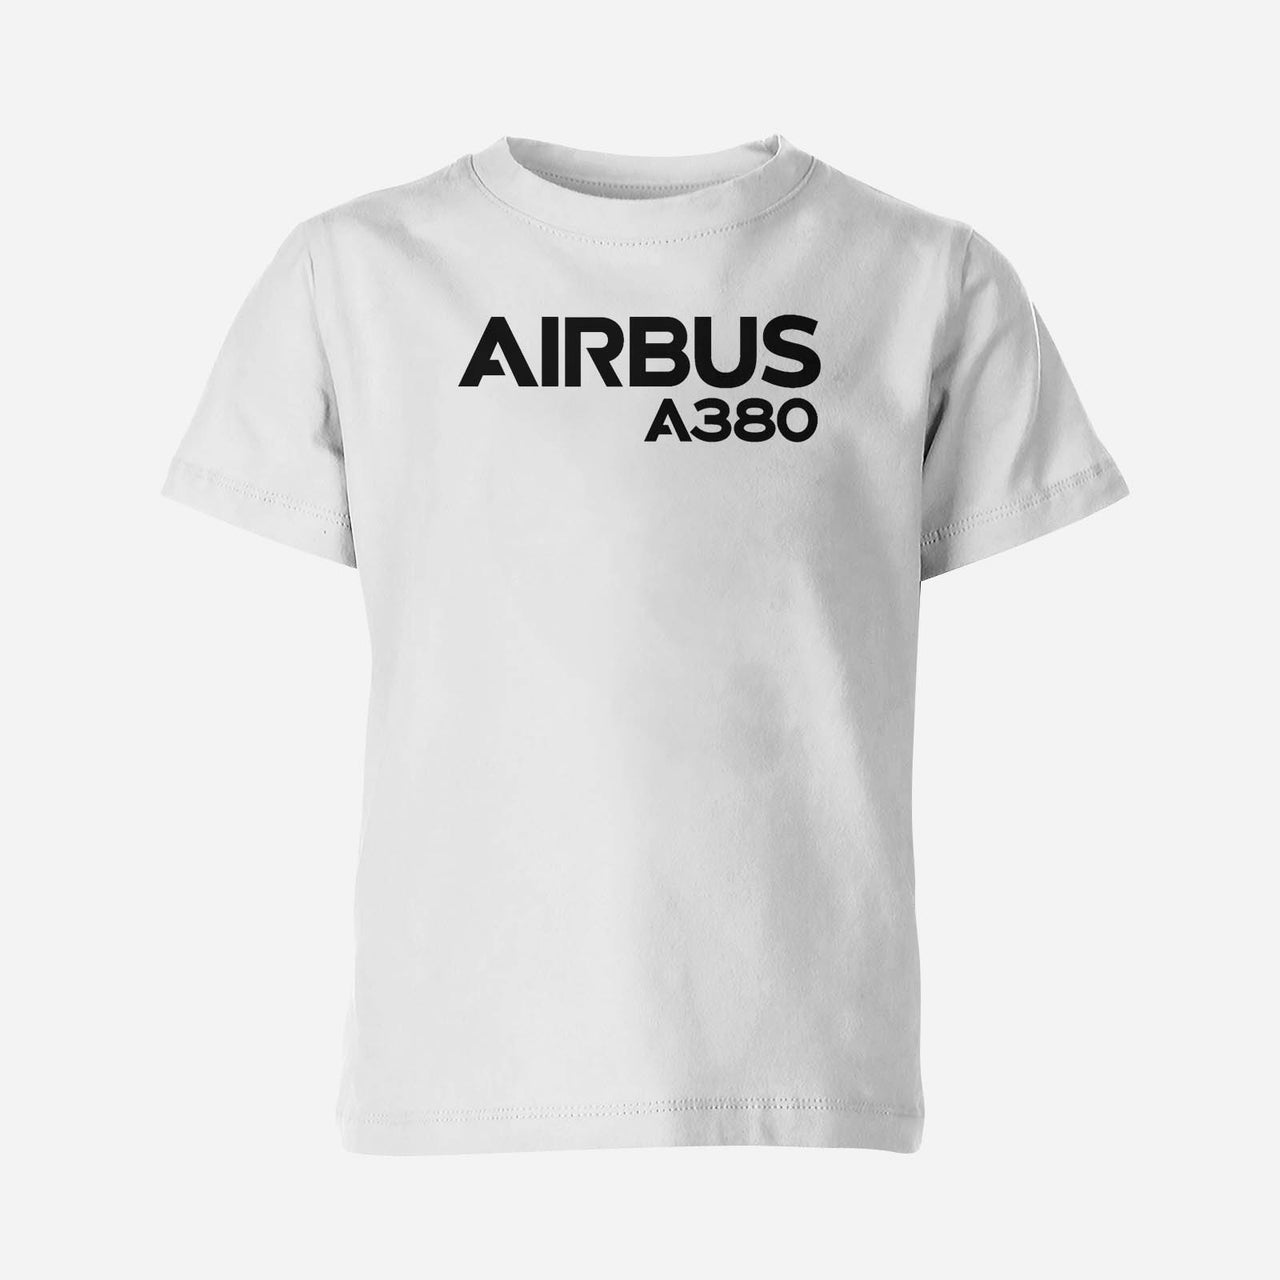 Airbus A380 & Text Designed Children T-Shirts